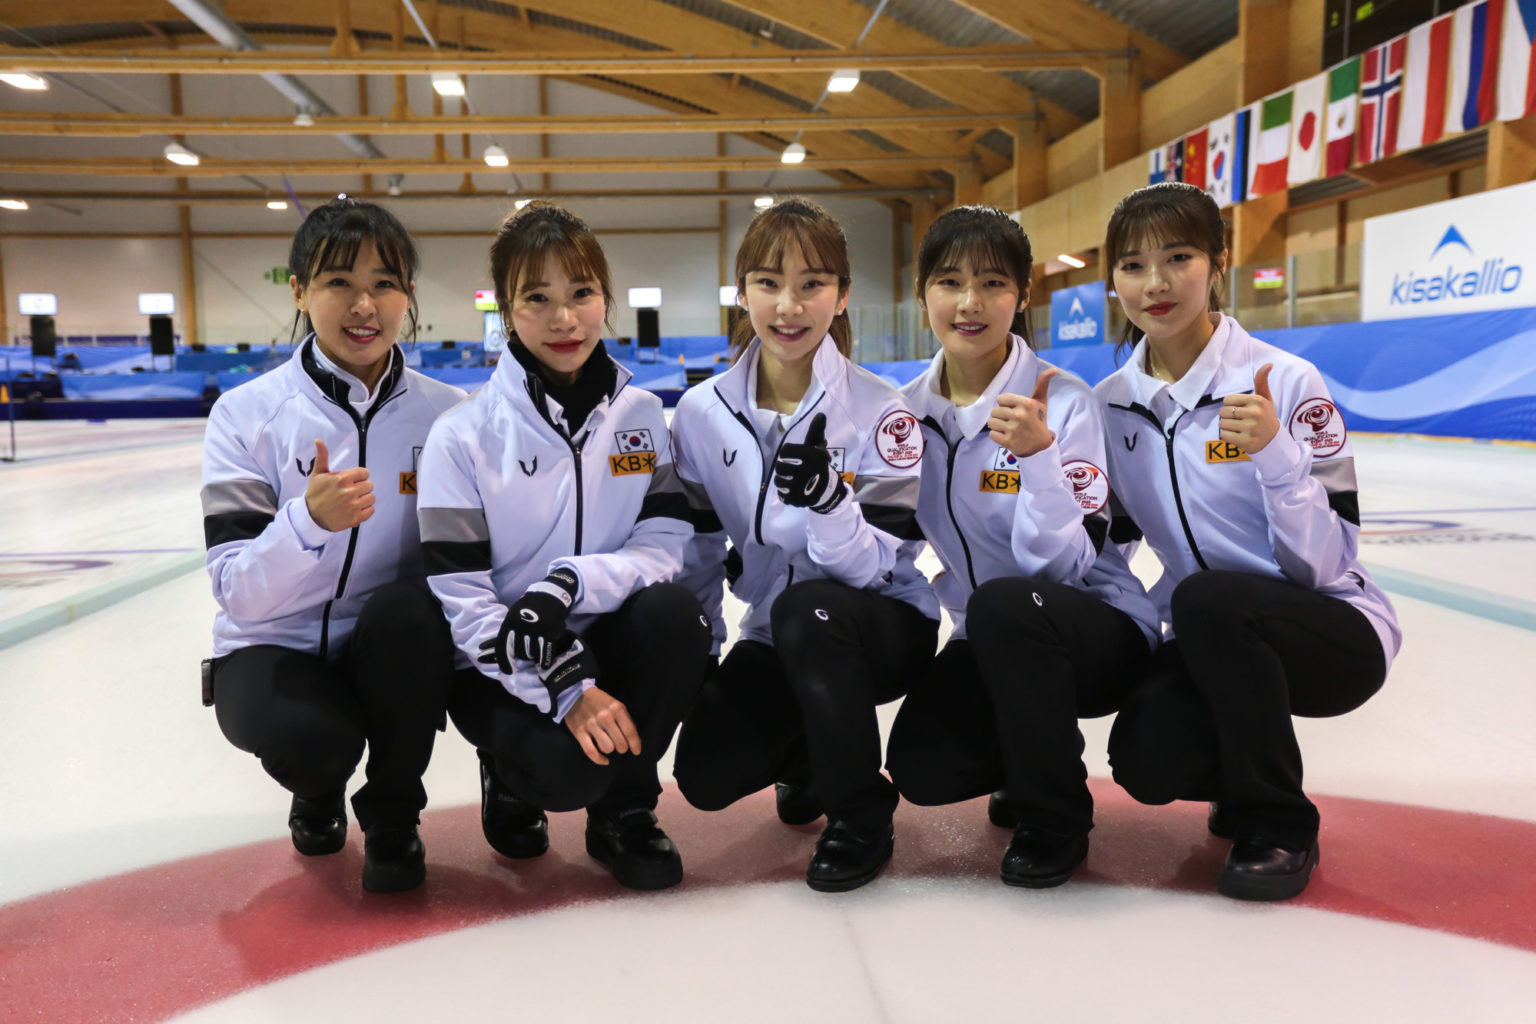 South Korea were one of the two teams to qualify for the World Women's Curling Championship today ©WCF/Tom Rowland